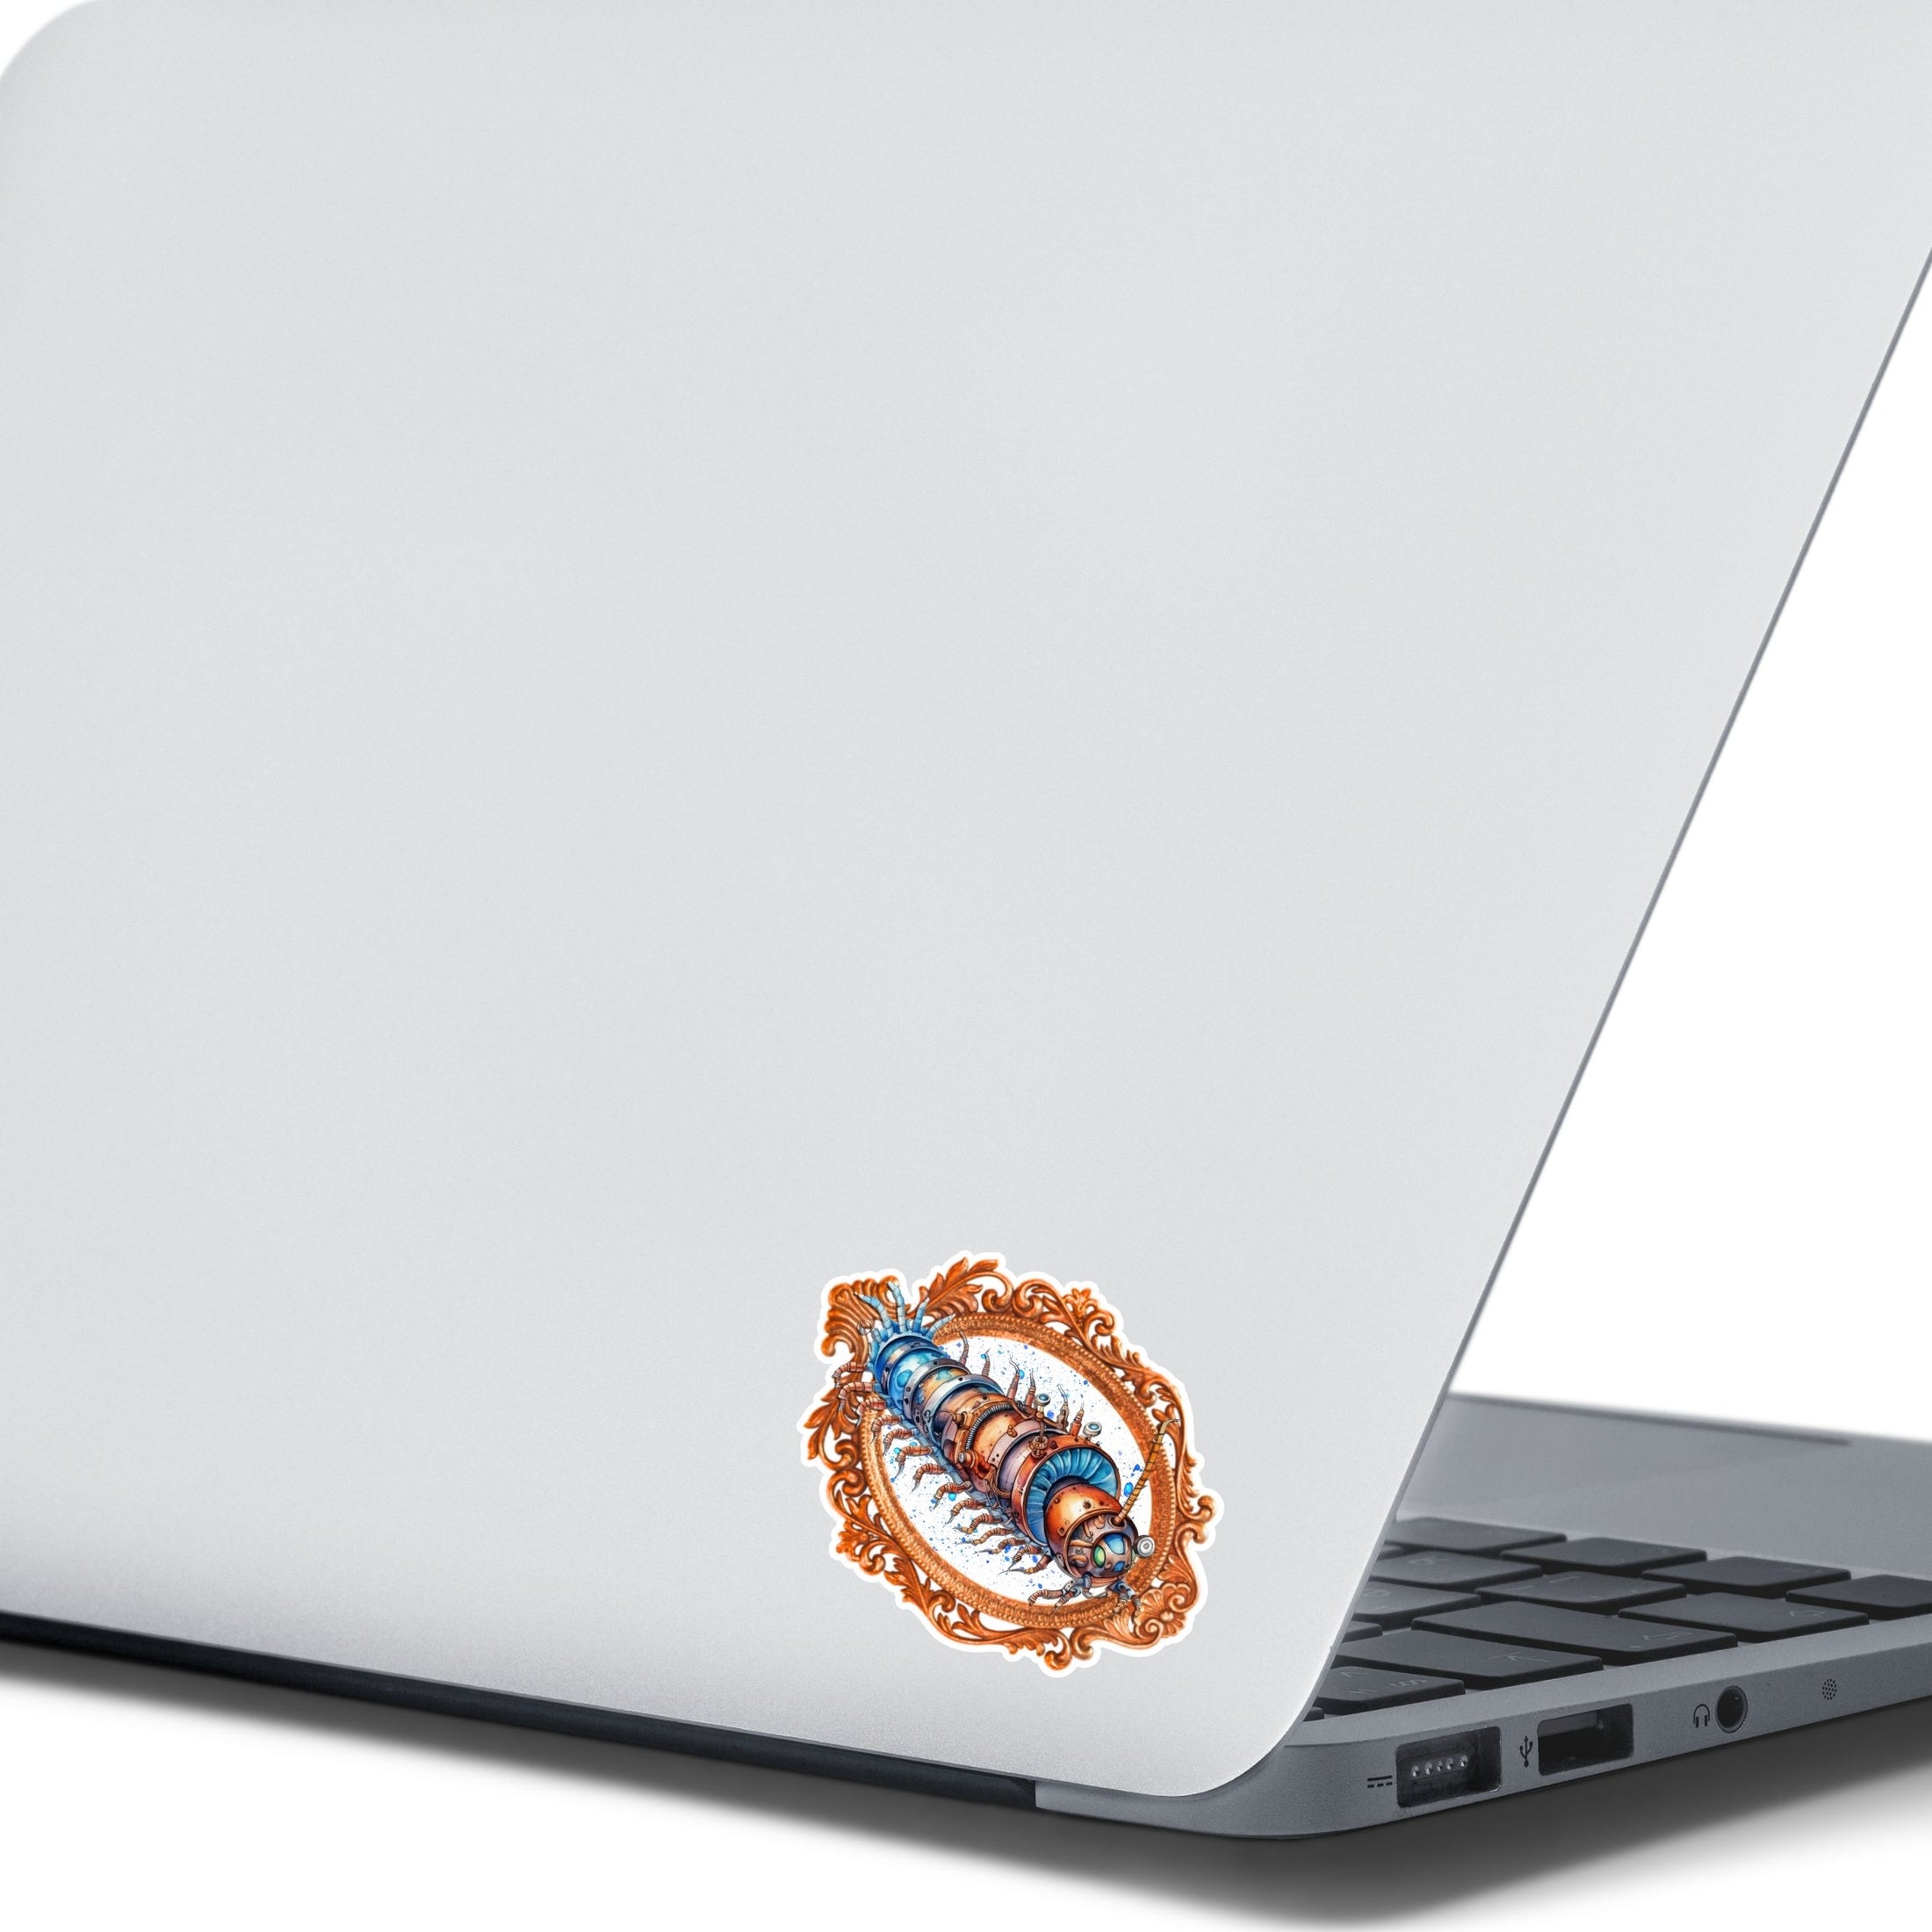 This image shows the steampunk centipede sticker on the back of an open laptop.